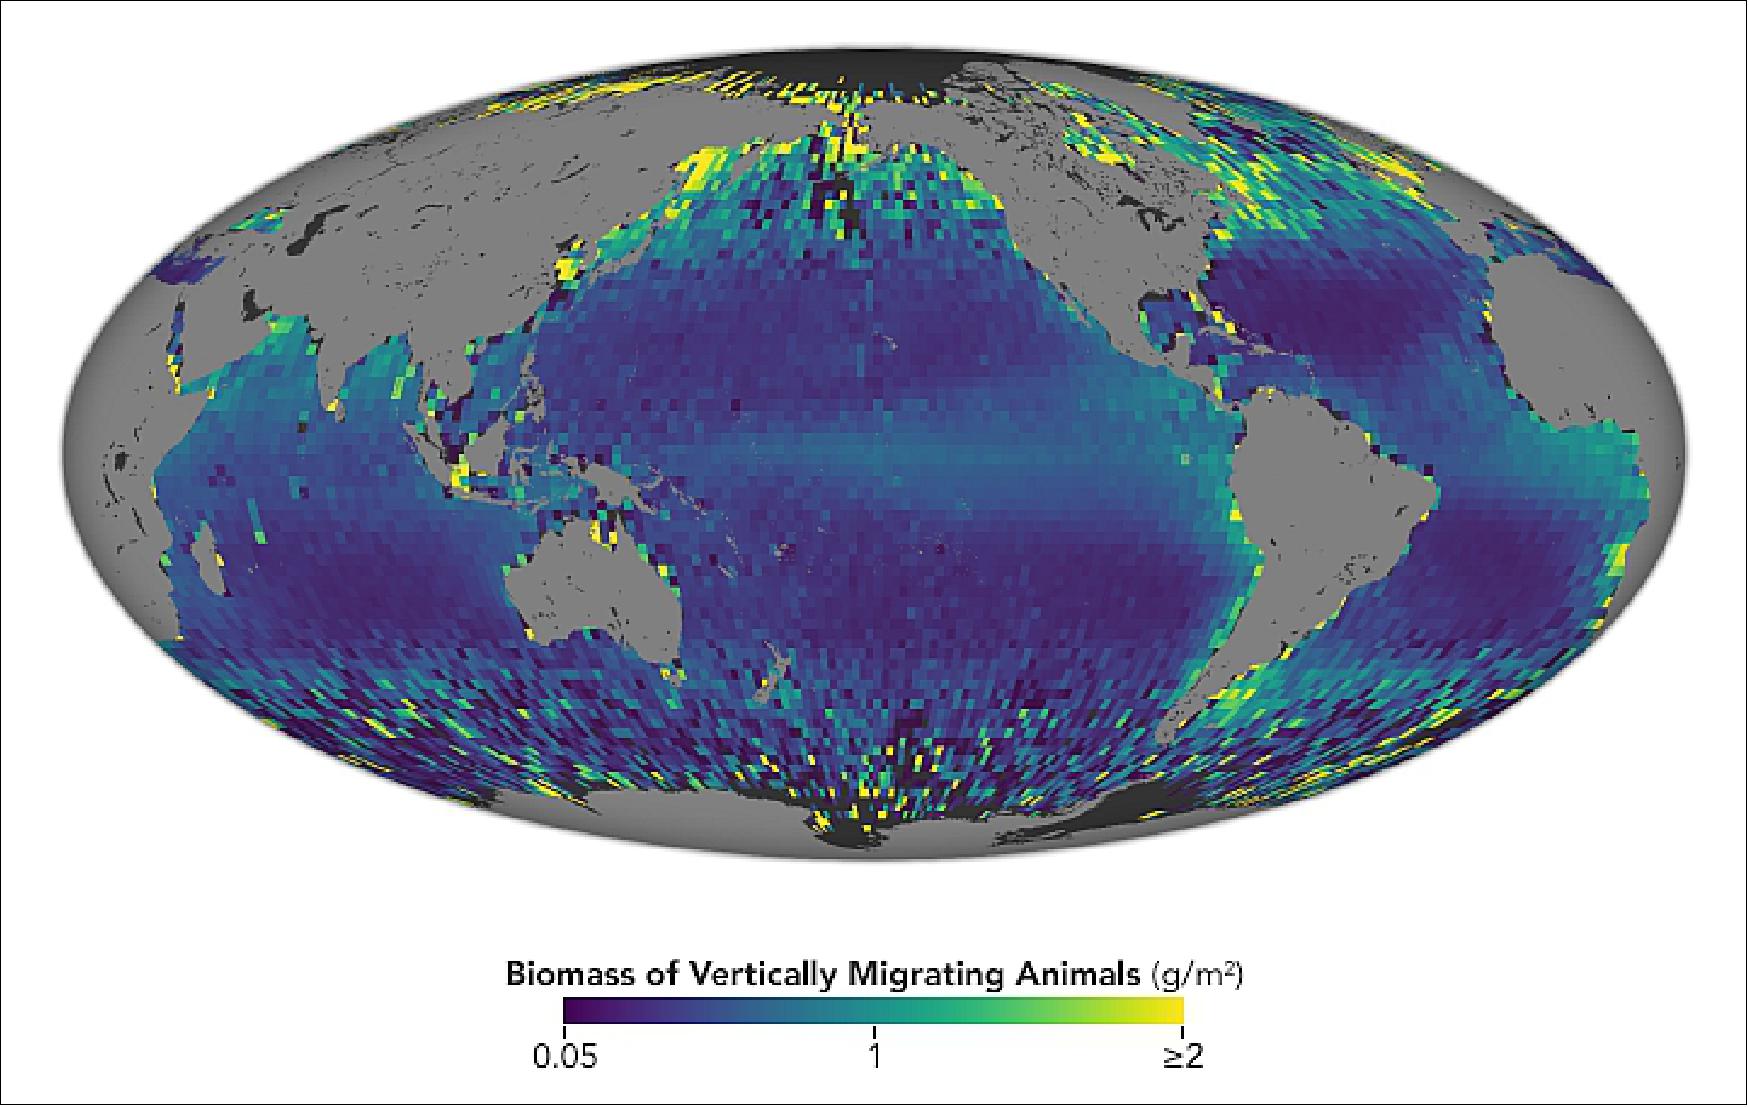 Figure 13: The map shows the distribution of vertical migrators in the world’s oceans, with brighter colors indicating greater abundance. In looking for patterns across the study period (2008-2017), the researchers found that while there are fewer vertically migrating animals in the lower-nutrient and clearer waters of tropical and subtropical ocean regions, they make up a much greater fraction of the total animal population in these regions. In murkier and more nutrient-rich regions (mostly higher latitudes), the abundance of animals that undergo DVM is higher, but they also represent a smaller fraction of the total animal population because more animals stay near the surface by day and night ((image credit: NASA Earth Observatory, image by Joshua Stevens, using data from Behrenfeld, M. J., et al. (2019), Story by Joseph Atkinson, NASA Langley Research Center, with Michael Carlowicz)